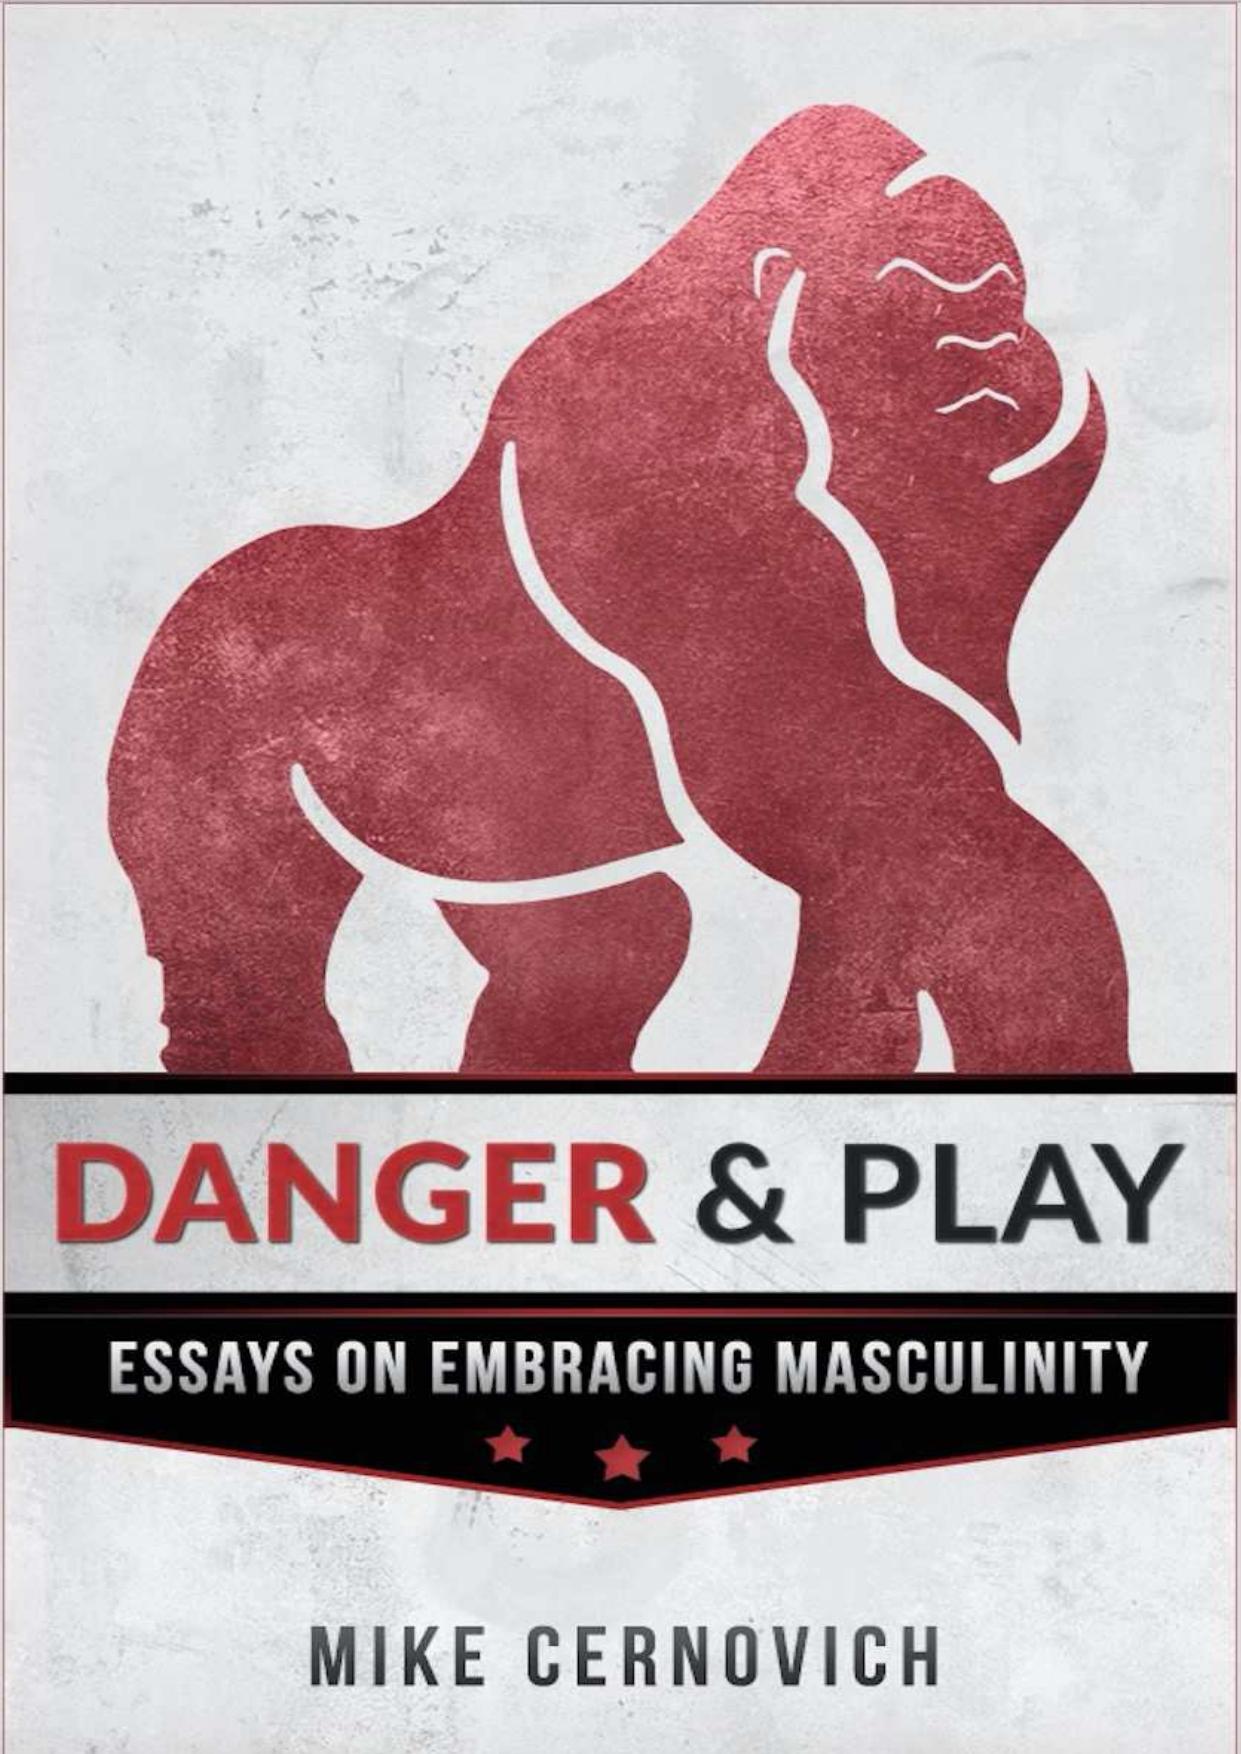 Danger & Play: Essays on Embracing Masculinity